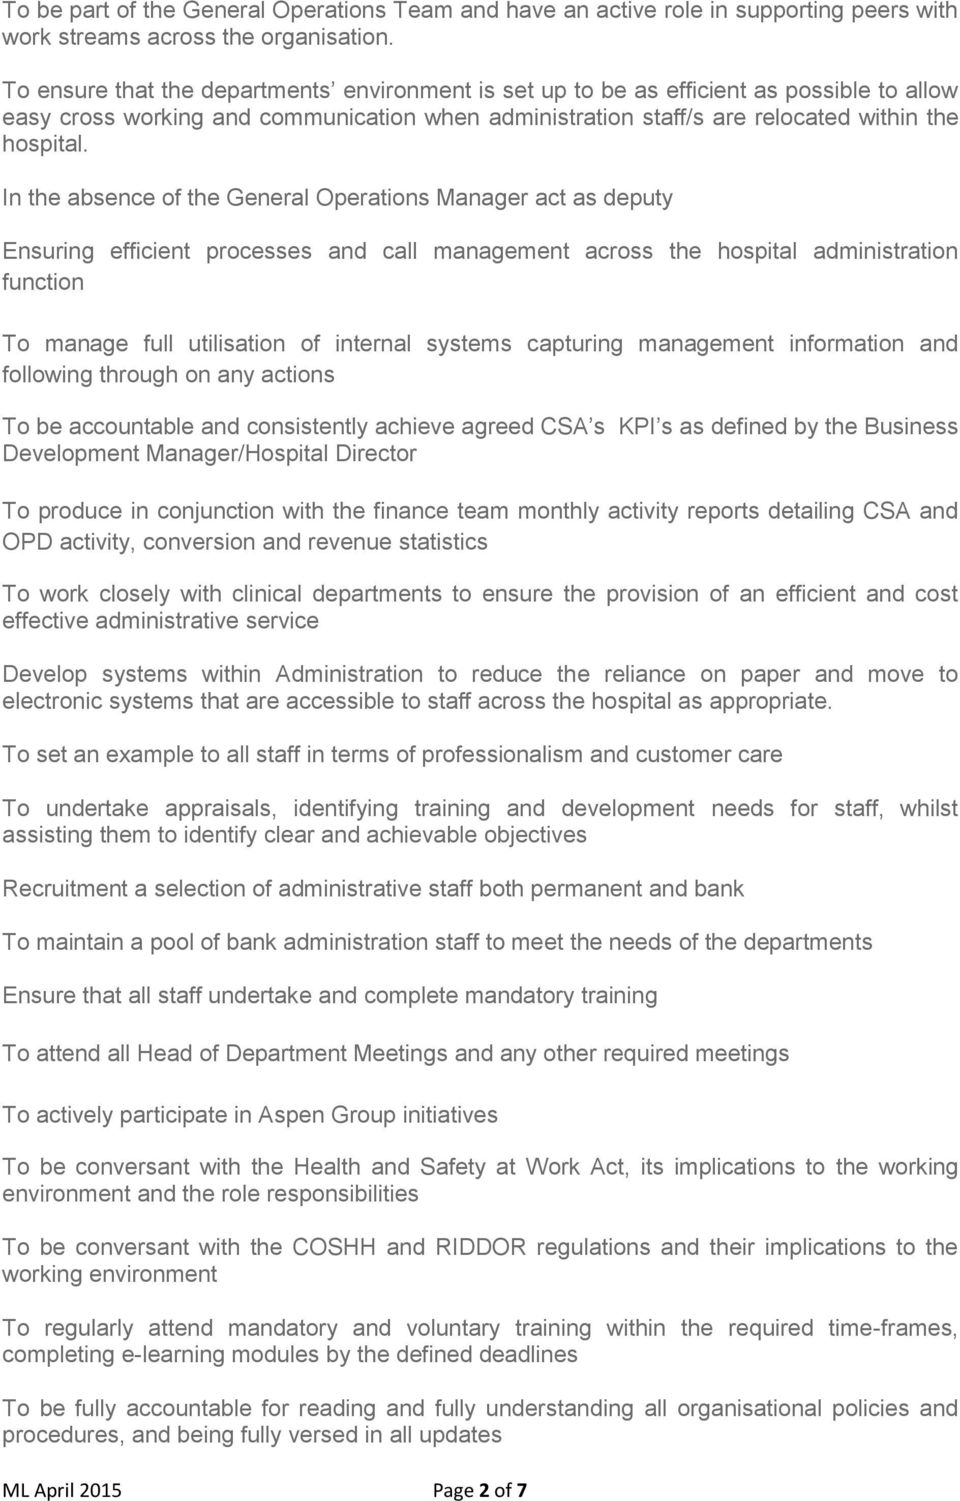 In the absence of the General Operations Manager act as deputy Ensuring efficient processes and call management across the hospital administration function To manage full utilisation of internal